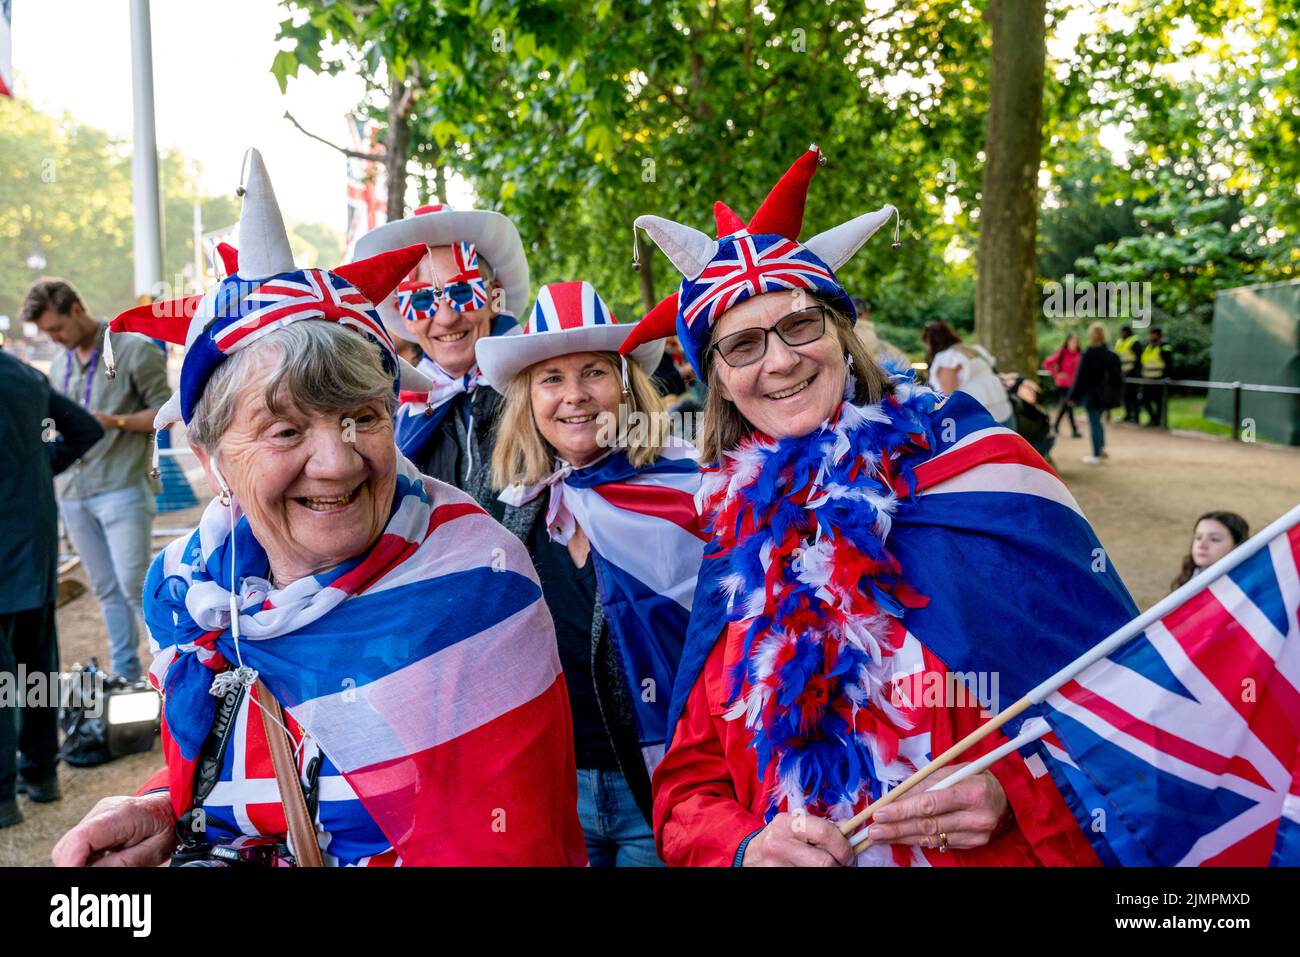 British People Arrive Early To Stand Along The Mall For A Good Vantage Spot To See The Queen's Birthday Parade, London, UK. Stock Photo